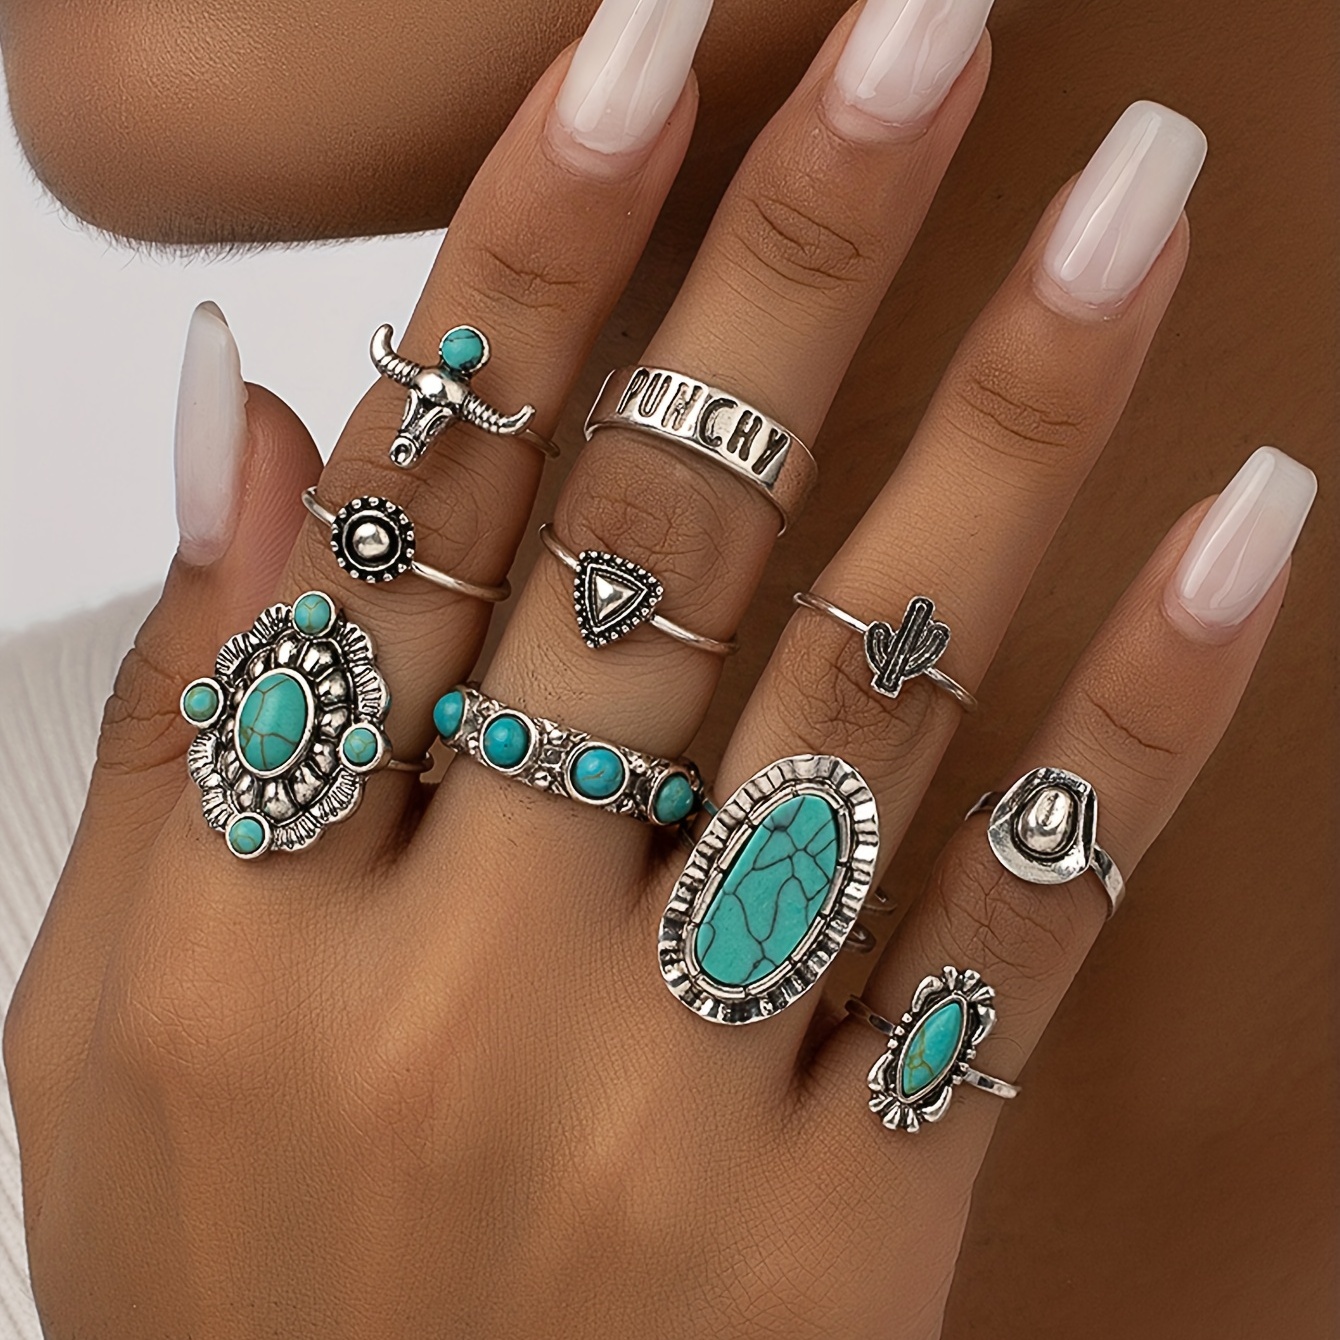 

10pcs Western Style Stacking Rings Inlaid Turquoise Trendy Bull Head Lotus Sun Design Mix And Match For Daily Outfits Perfect Decor For Cool